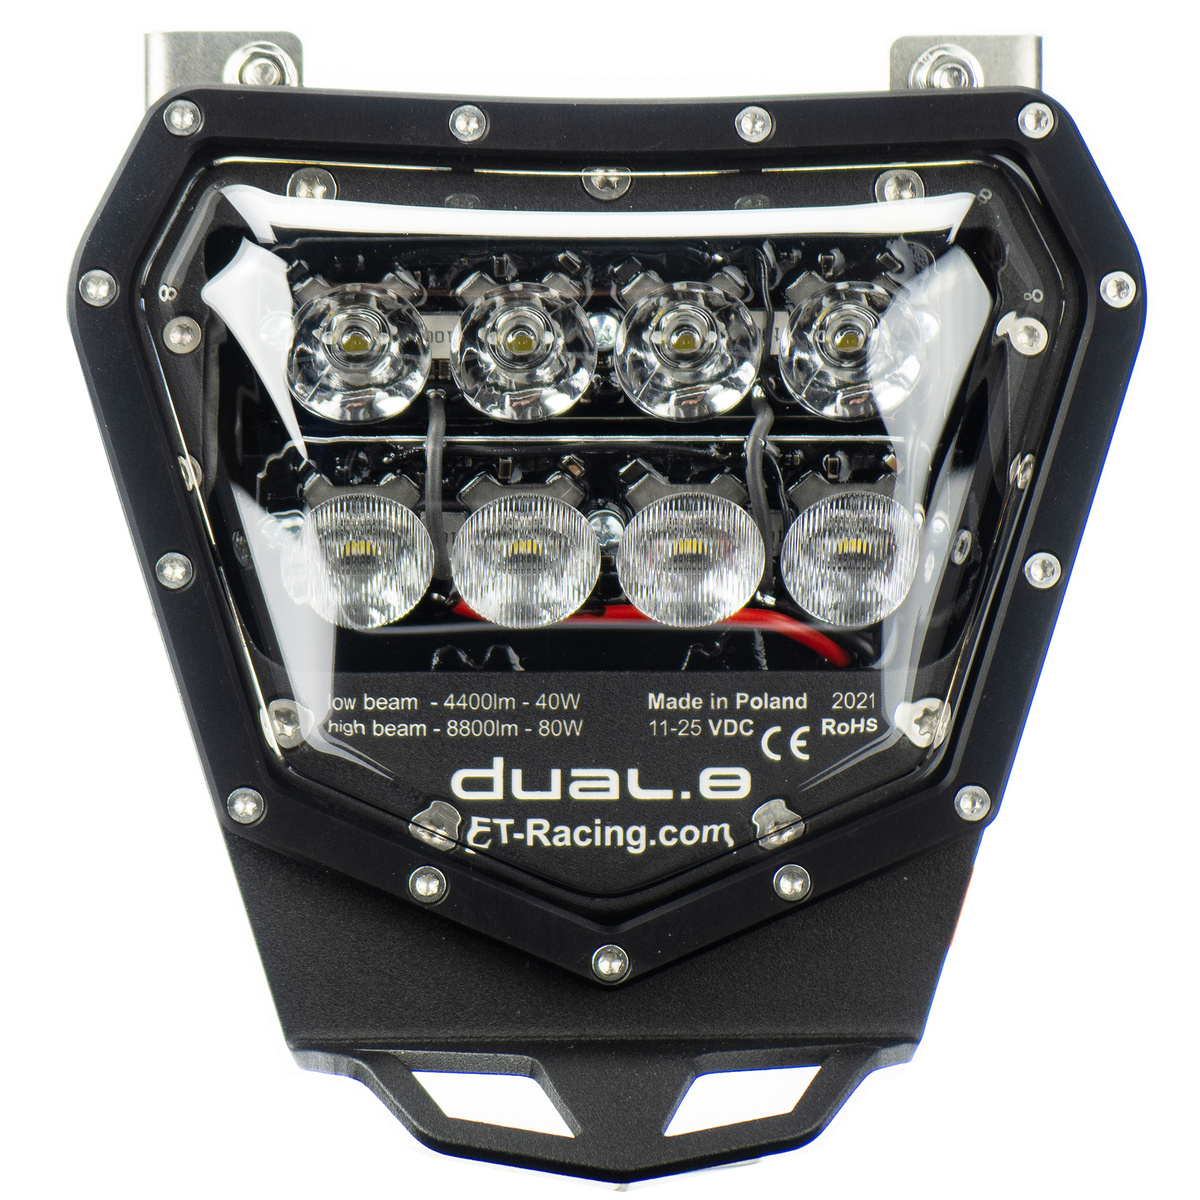 【GAS GAS】LED lamp Headlight Dual.8 GAS GAS ES 700 / SM 700 only FUEL INJECTION engine